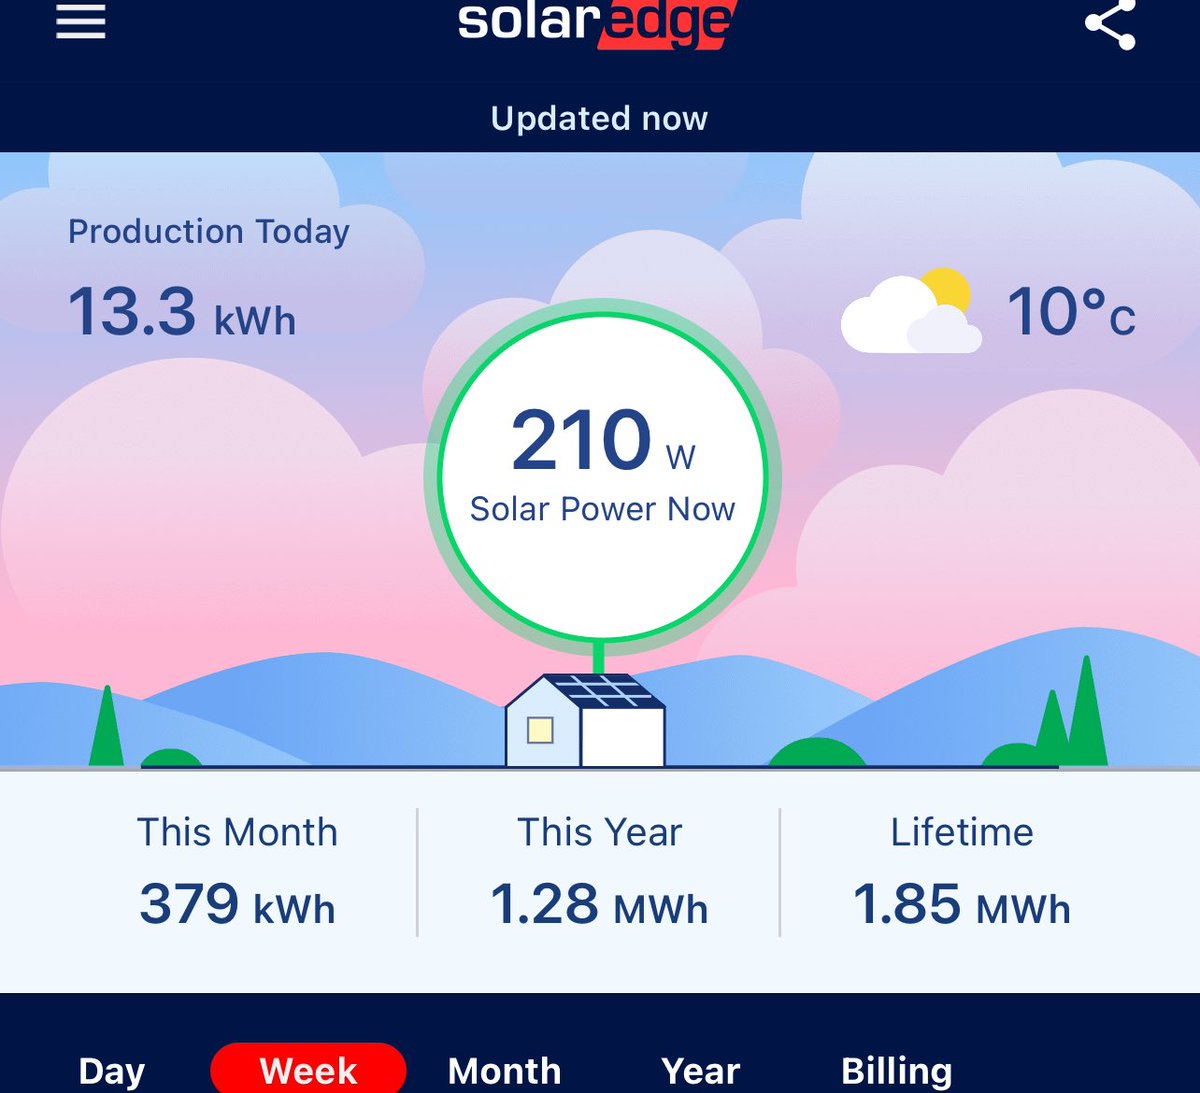 It doesn't look like the suns stick around today. I produced over 20 kW less today at 13.3 kWh but it's been pretty cloudy too in Spain. (She's says while on her second glass off 🍷) 🤣🇪🇸🫡